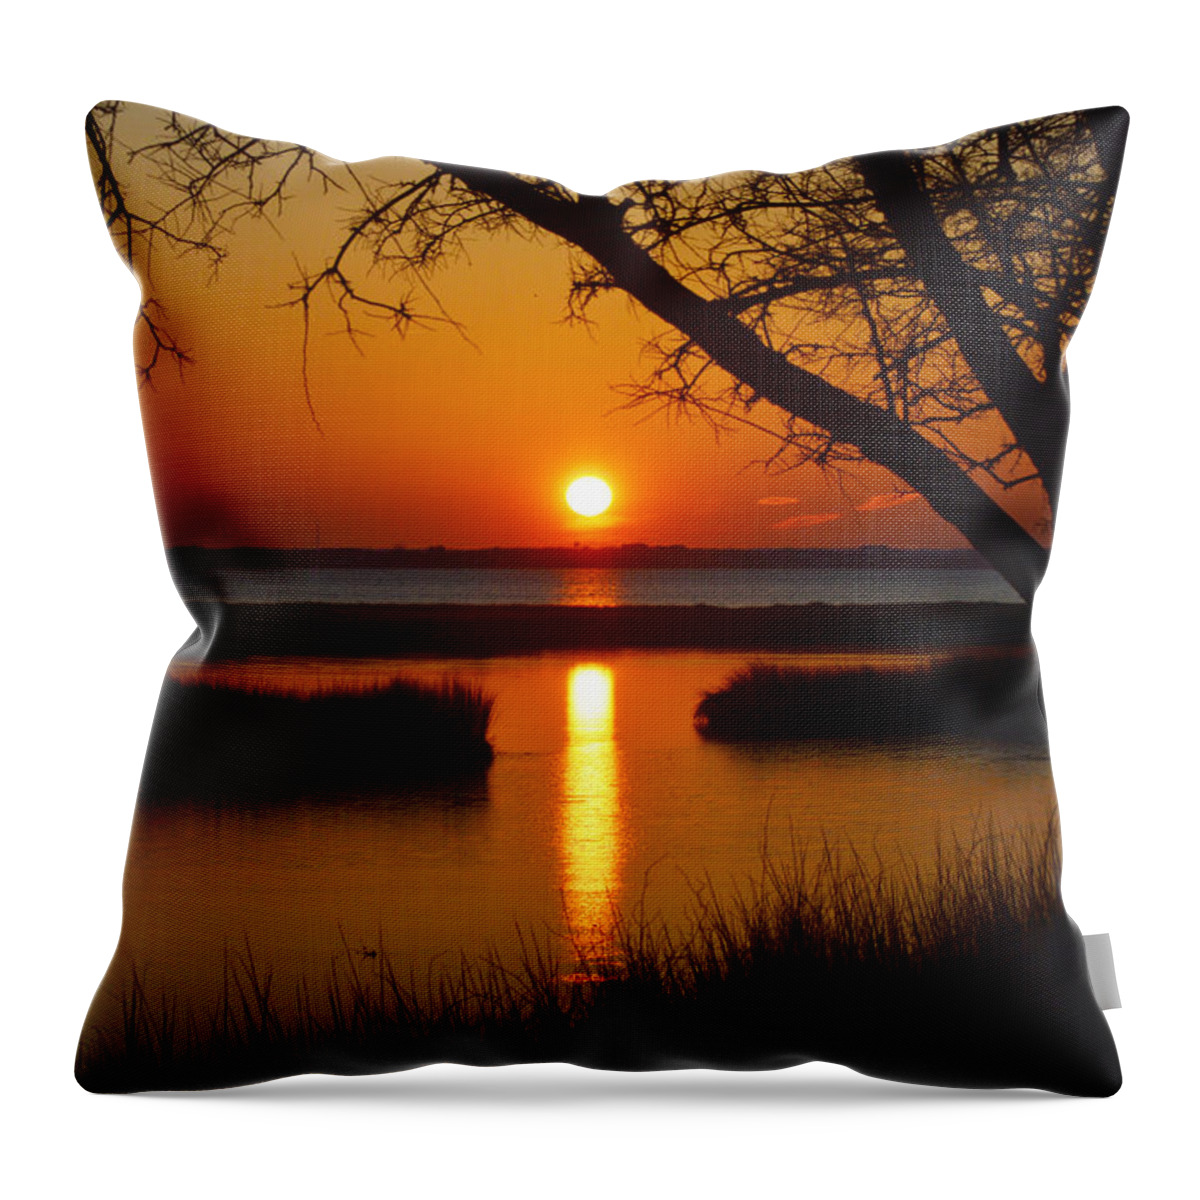 Ocean City Sunset Throw Pillow featuring the photograph Ocean City Sunset at Old Landing Road by Bill Swartwout